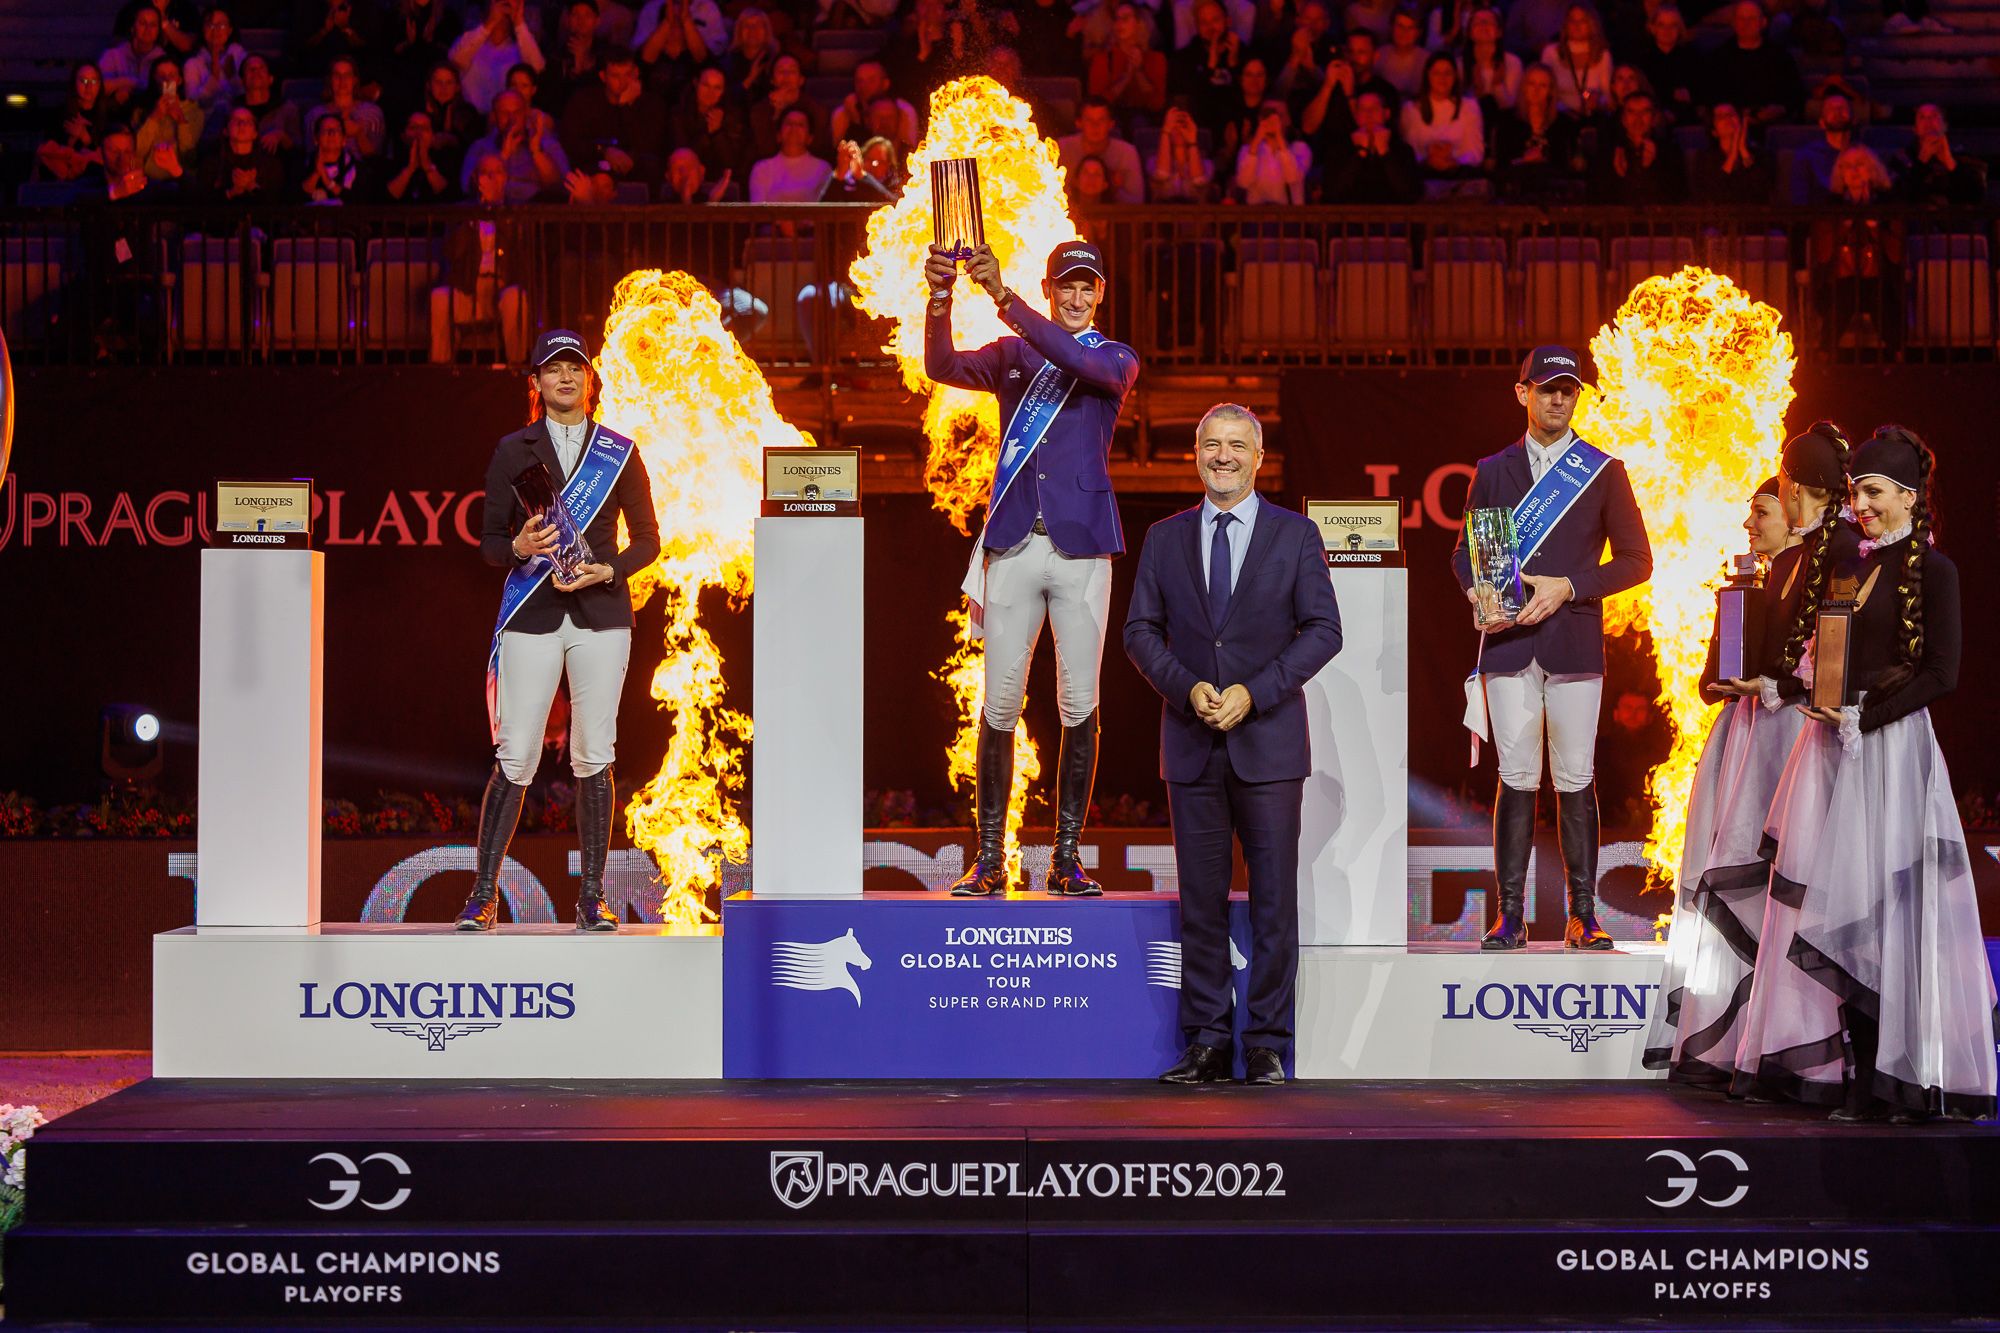 What does an LGCT season bring to the table?